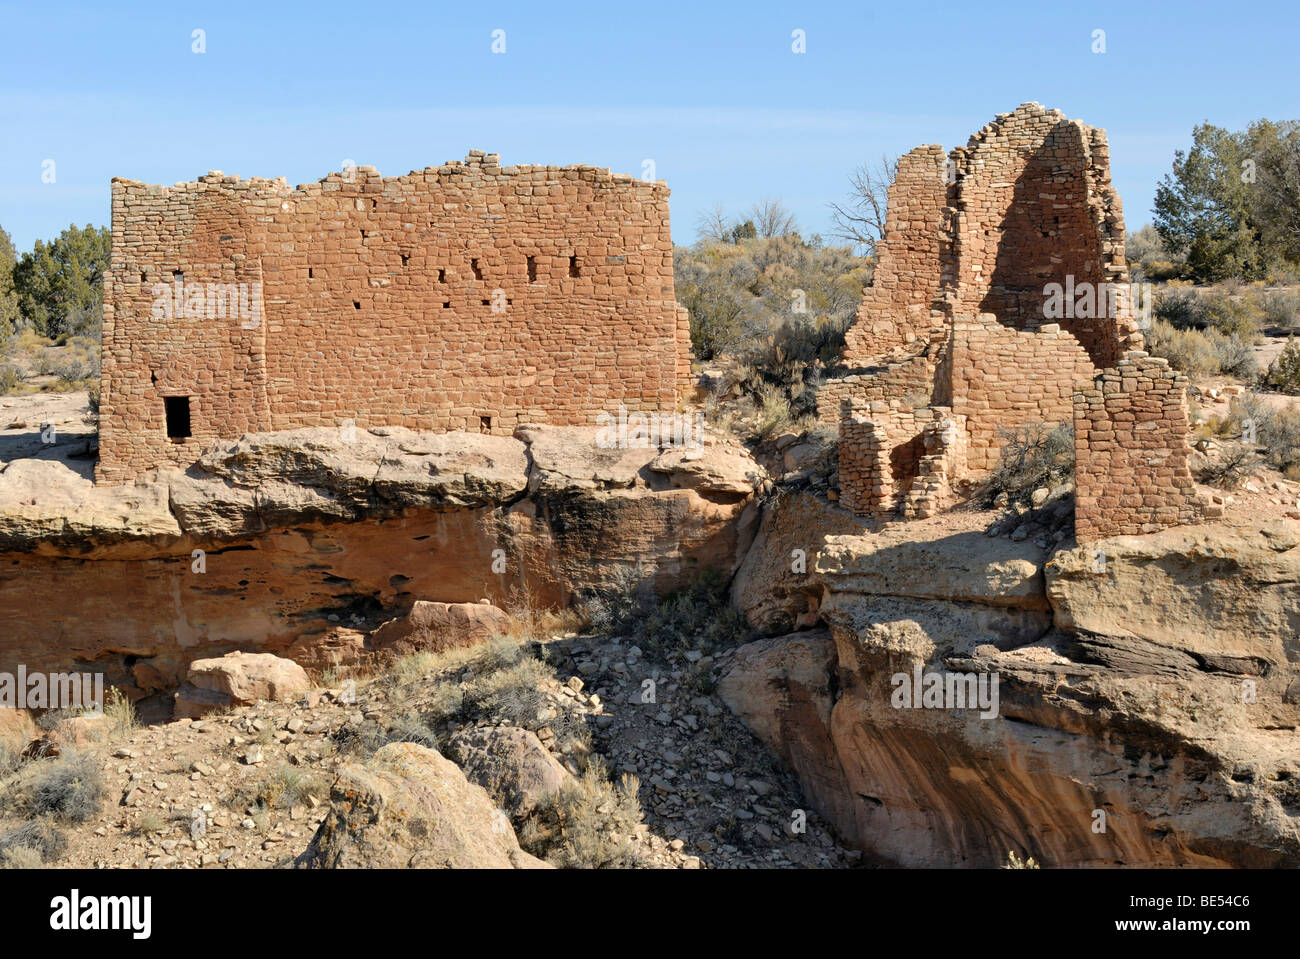 Remains of historic buildings of the Ancestral Puebloans, Hovenweep Castle, around 1200 AD, Little Ruin Canyon, Hovenweep Natio Stock Photo